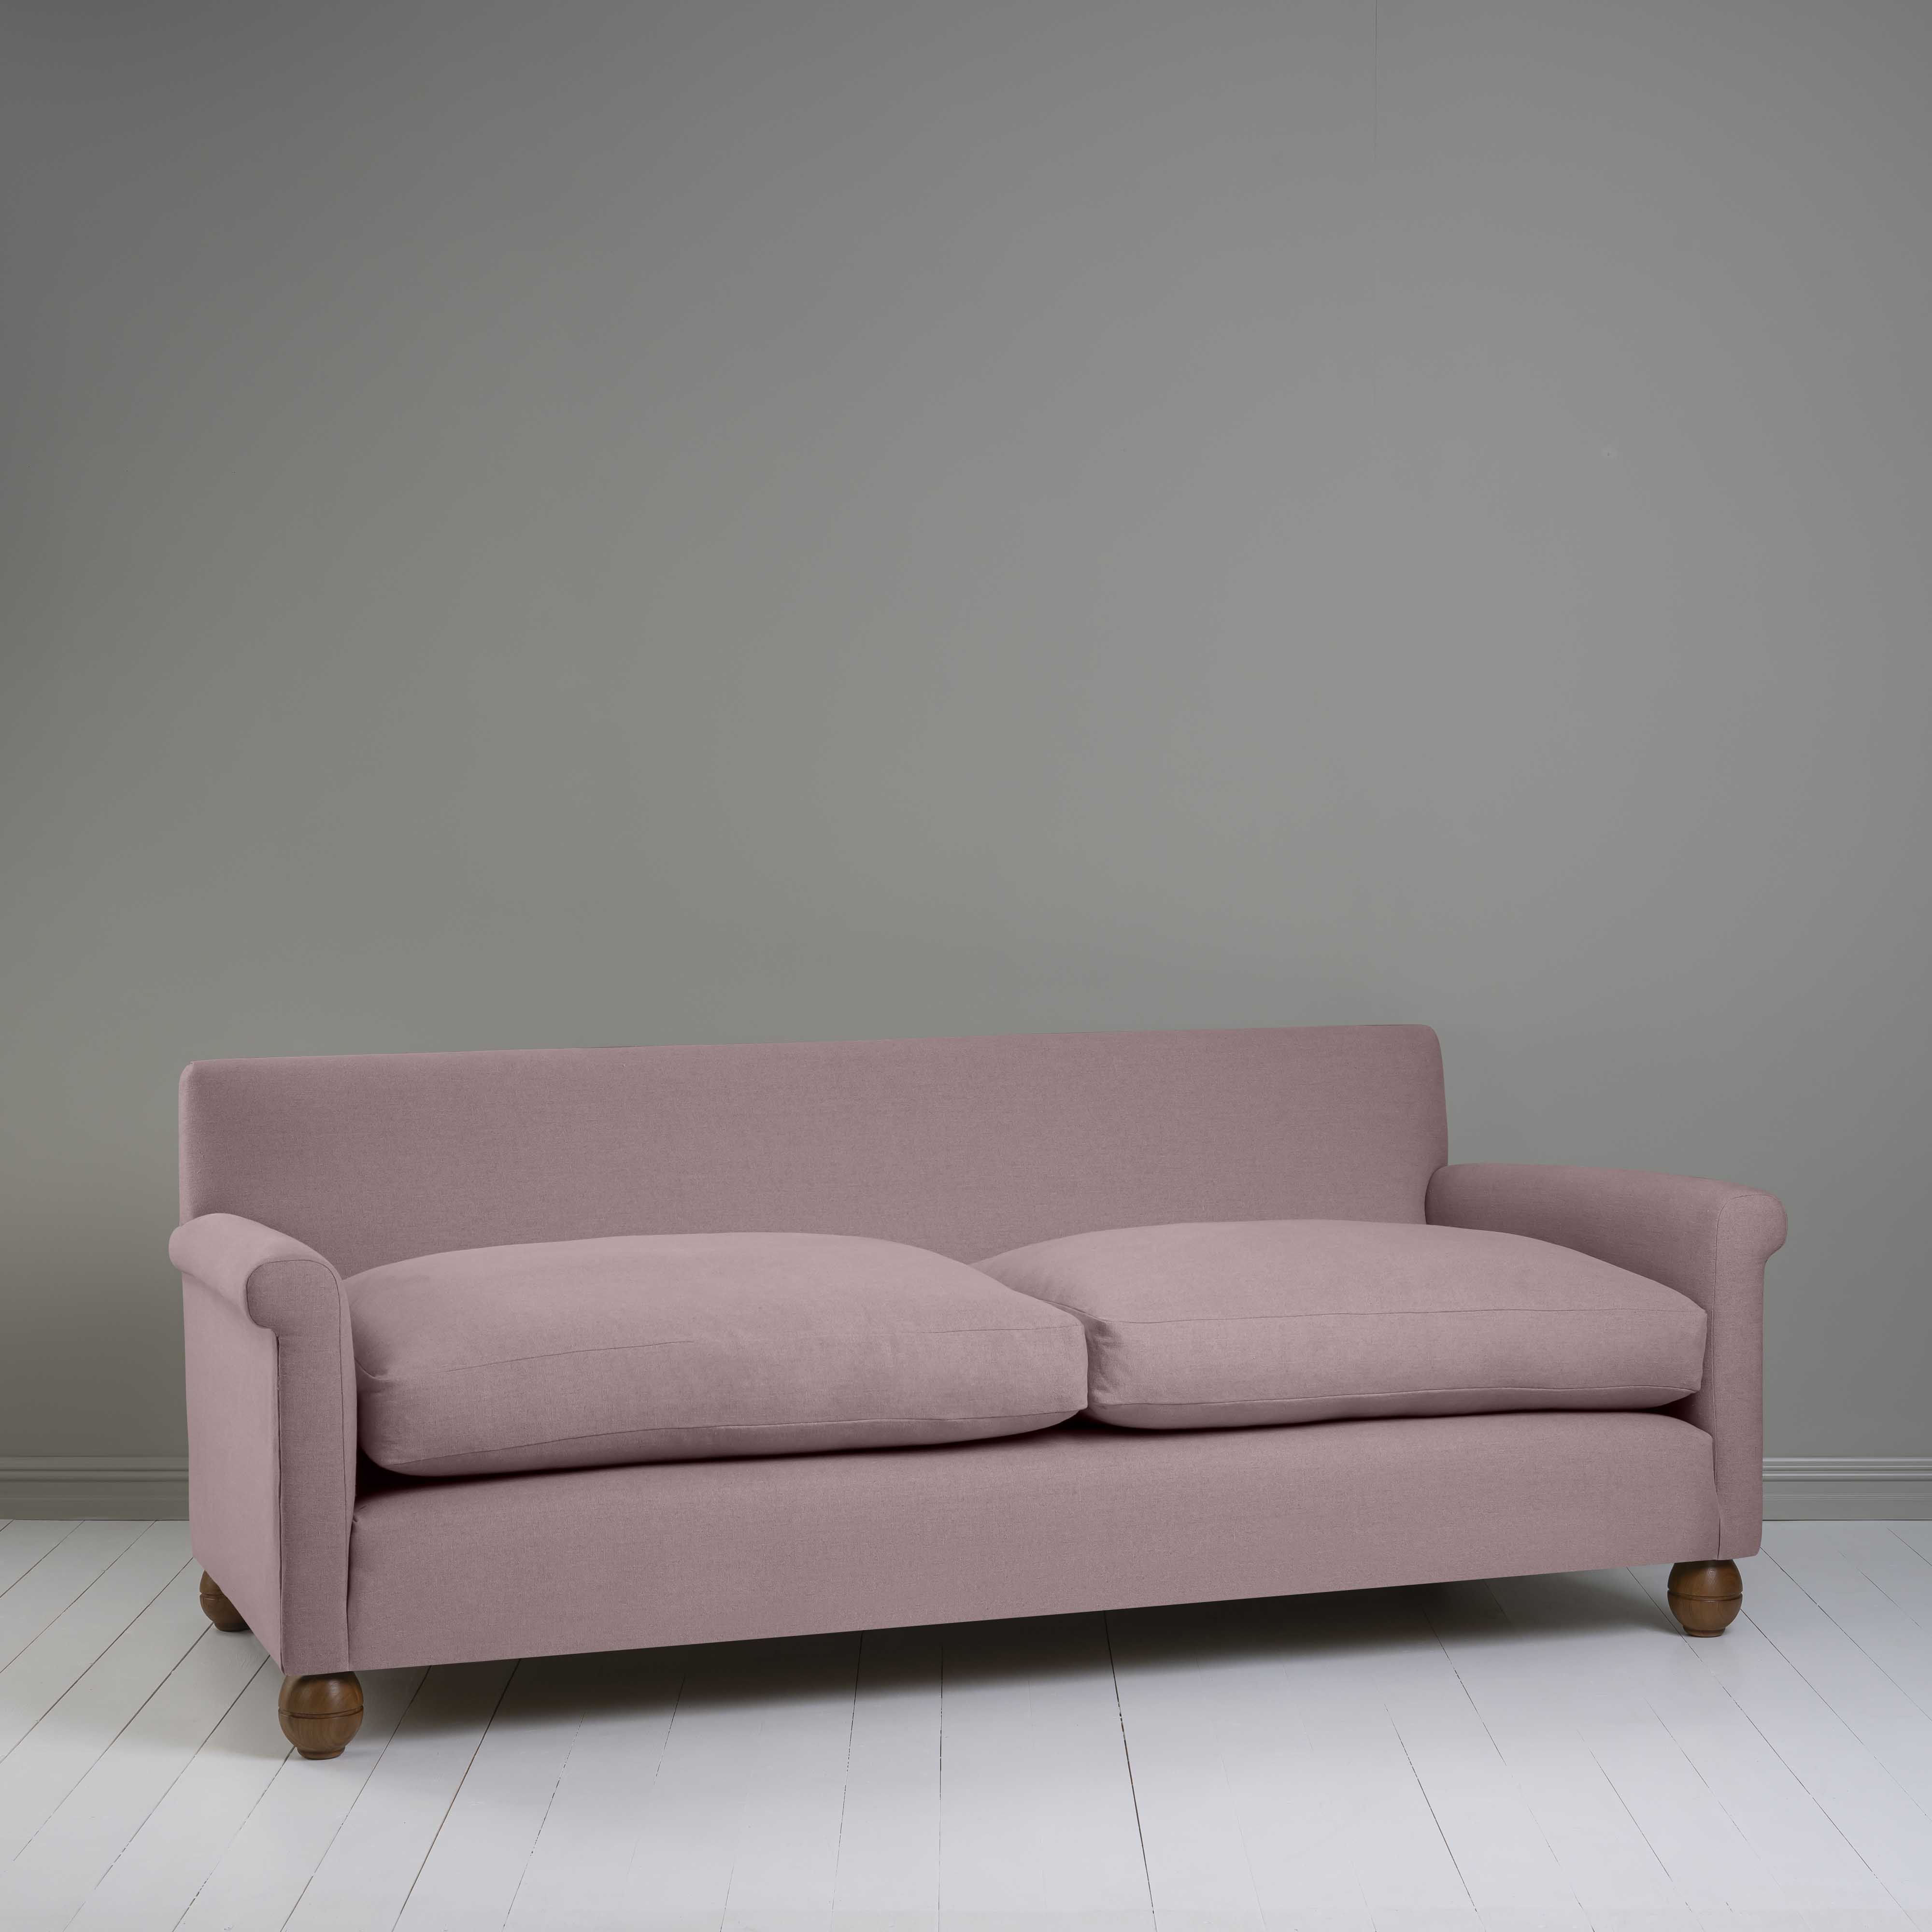  Idler 4 seater sofa in Laidback Linen Heather 